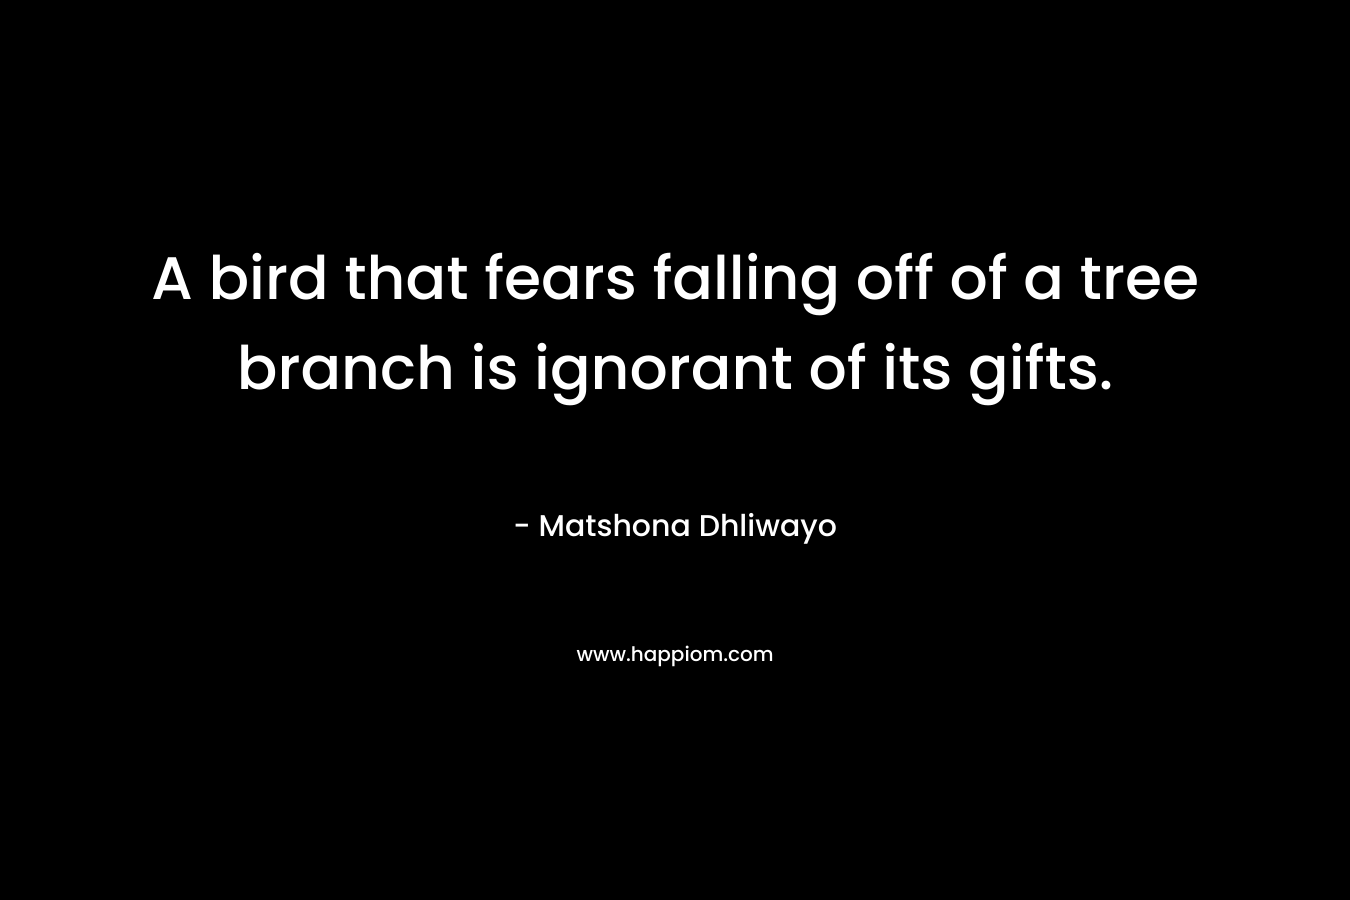 A bird that fears falling off of a tree branch is ignorant of its gifts.